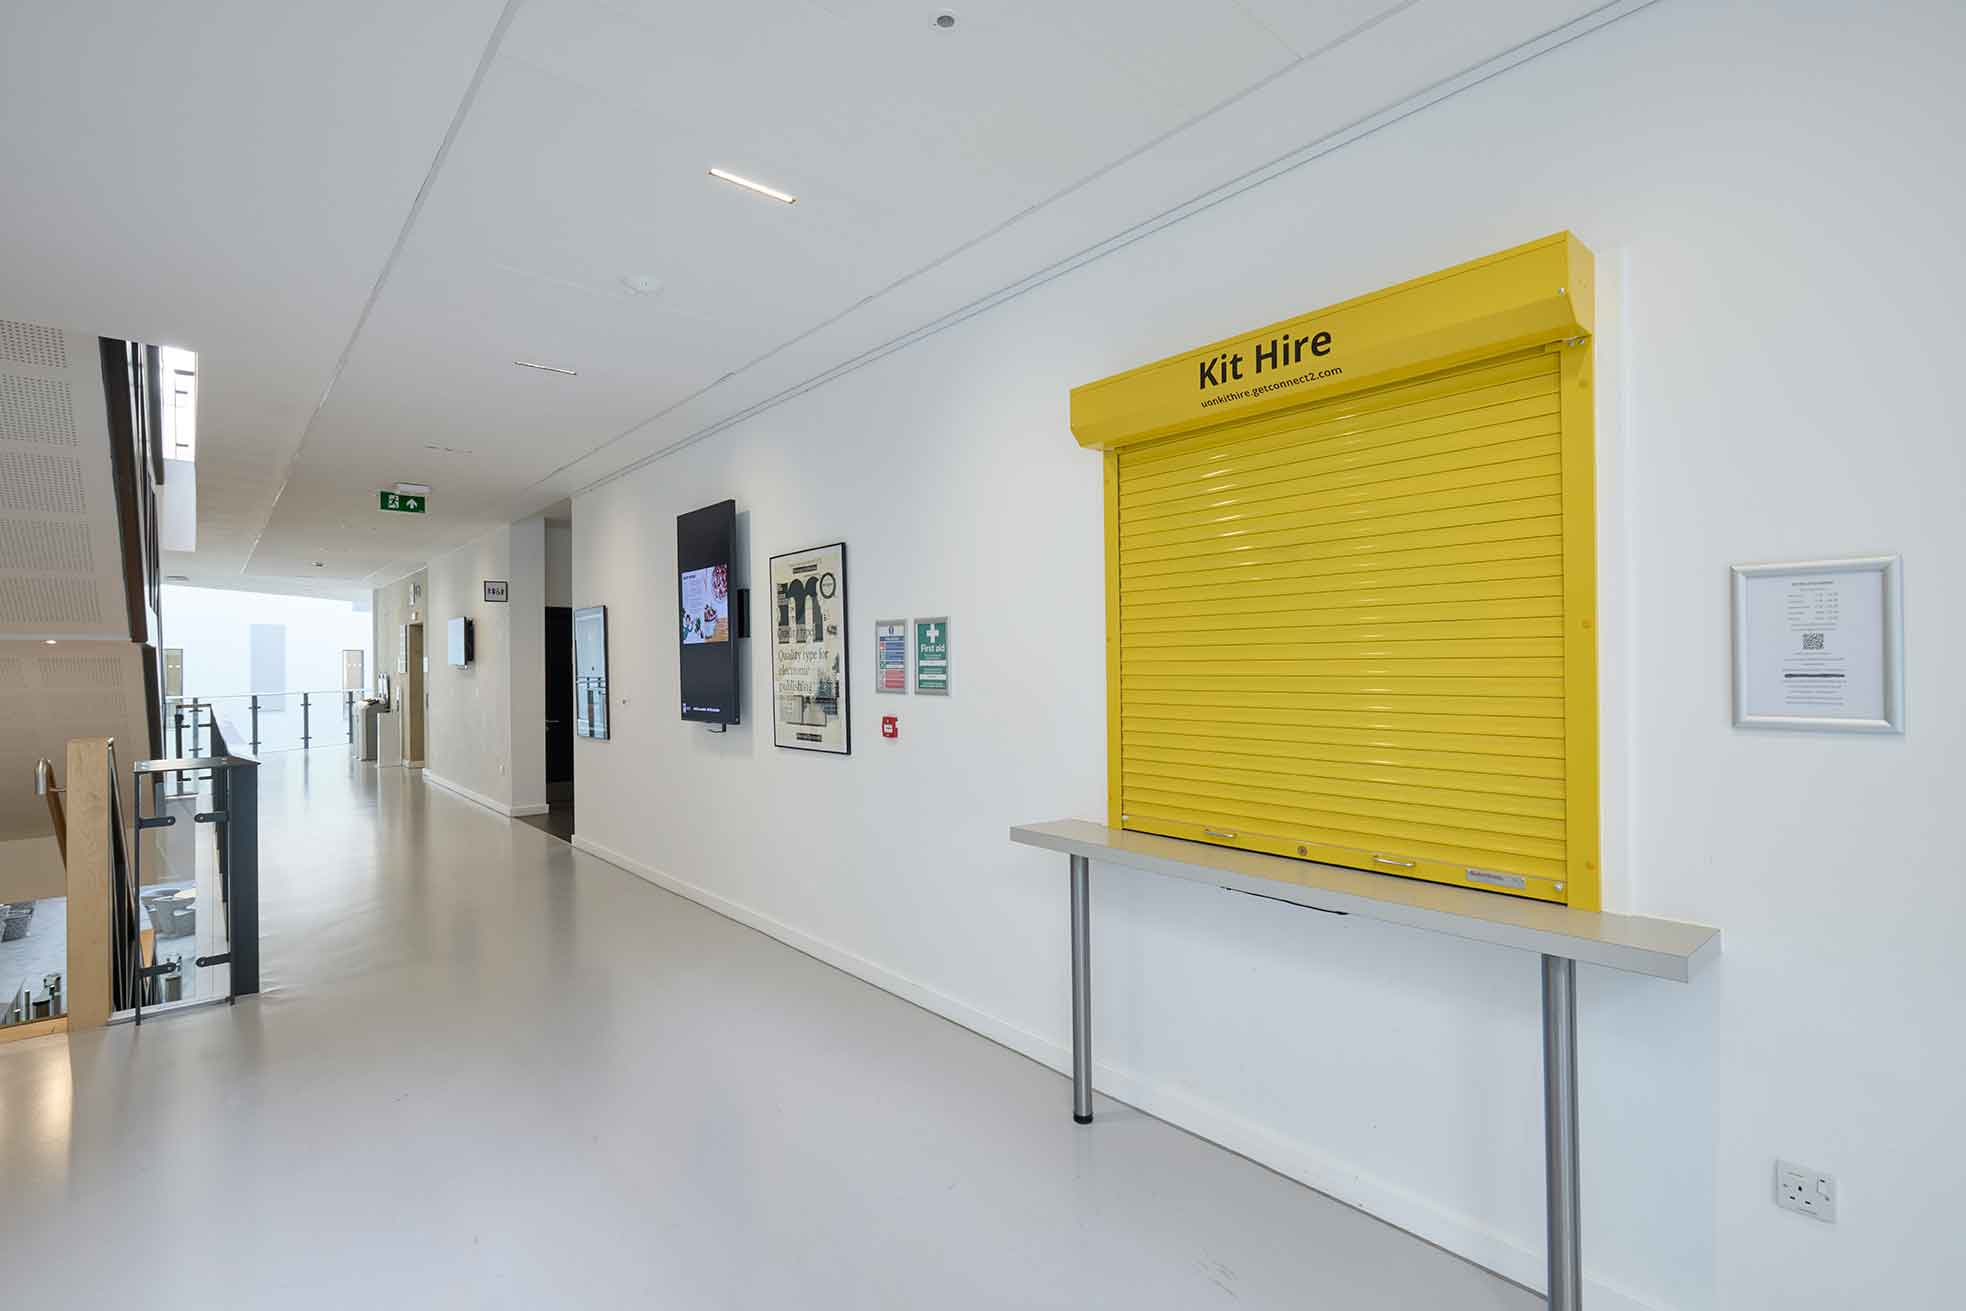 The photograph shows the yellow Kit Hire window with yellow shutters pulled down on the first floor corridor of the Creative Hub